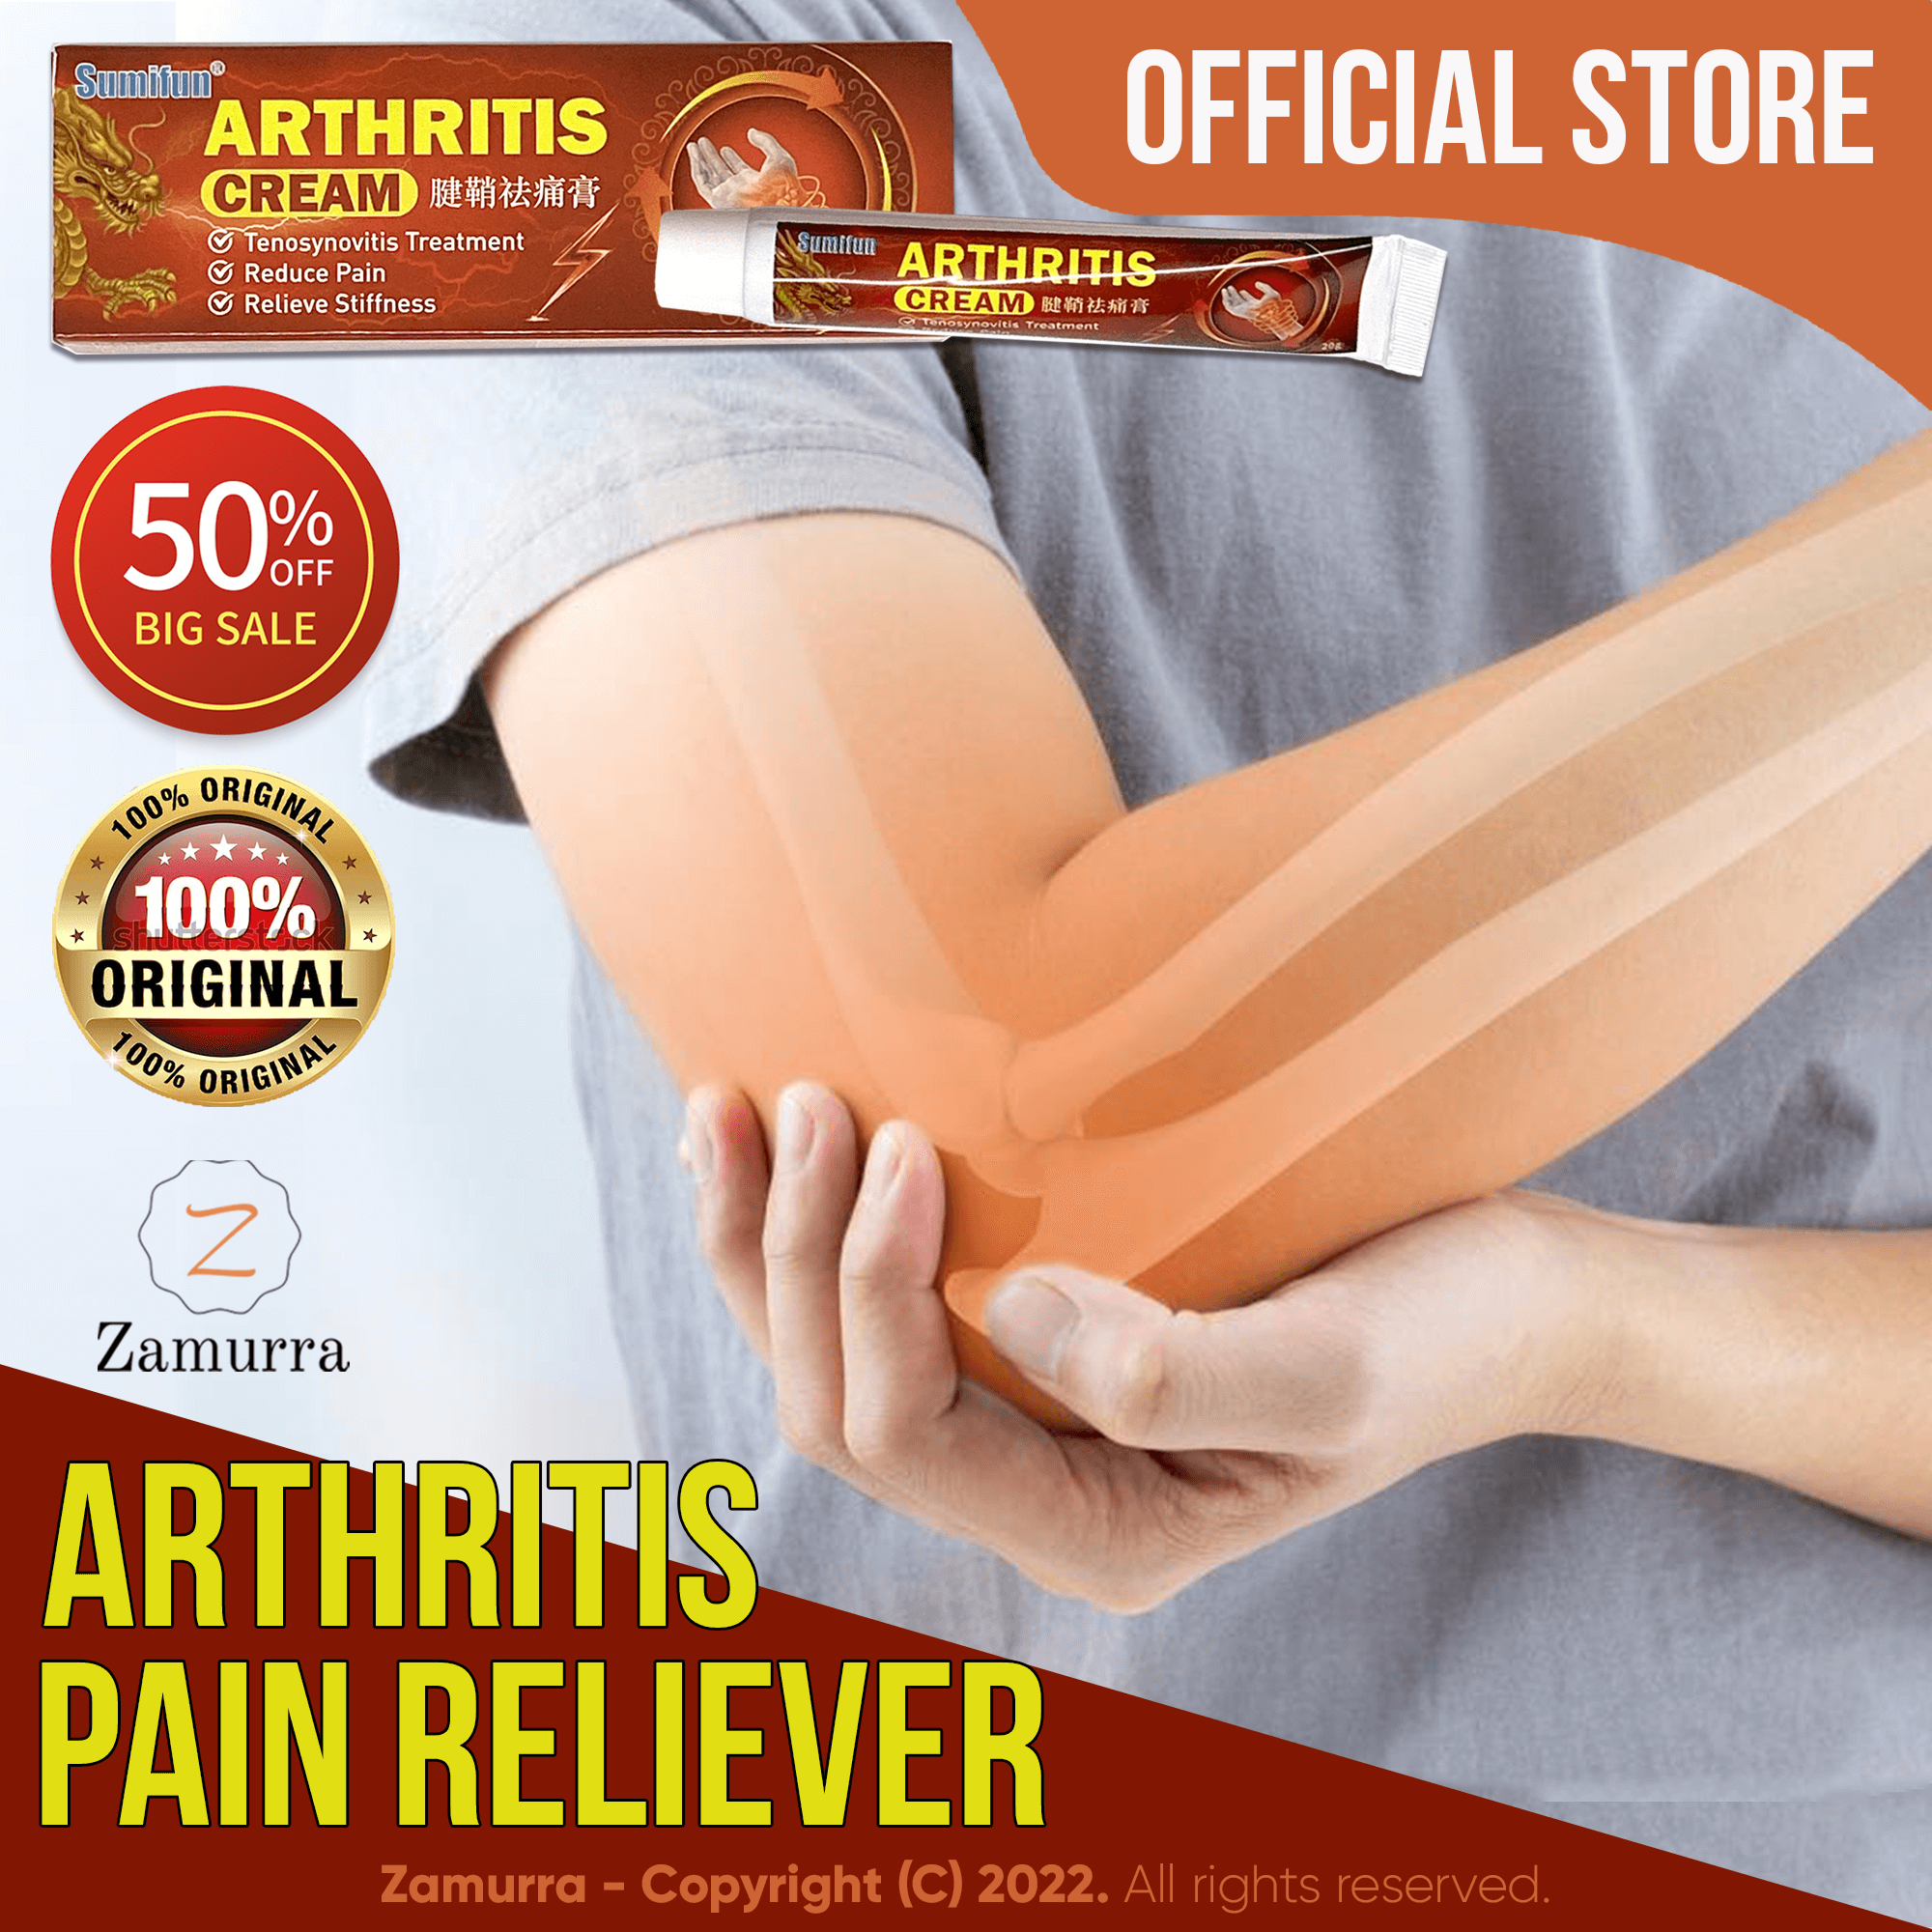 100% ORIGINAL ARTHRITIS Cream, Ointment for Arthritis | Rayuma | Muscle and Joint  Pain Reliever, Tenosynovitis Treatment, Arthritis Gout Cream, Cream Relief  for Knee, Wrist, Elbow, Shoulder and Back Pain, 20g by